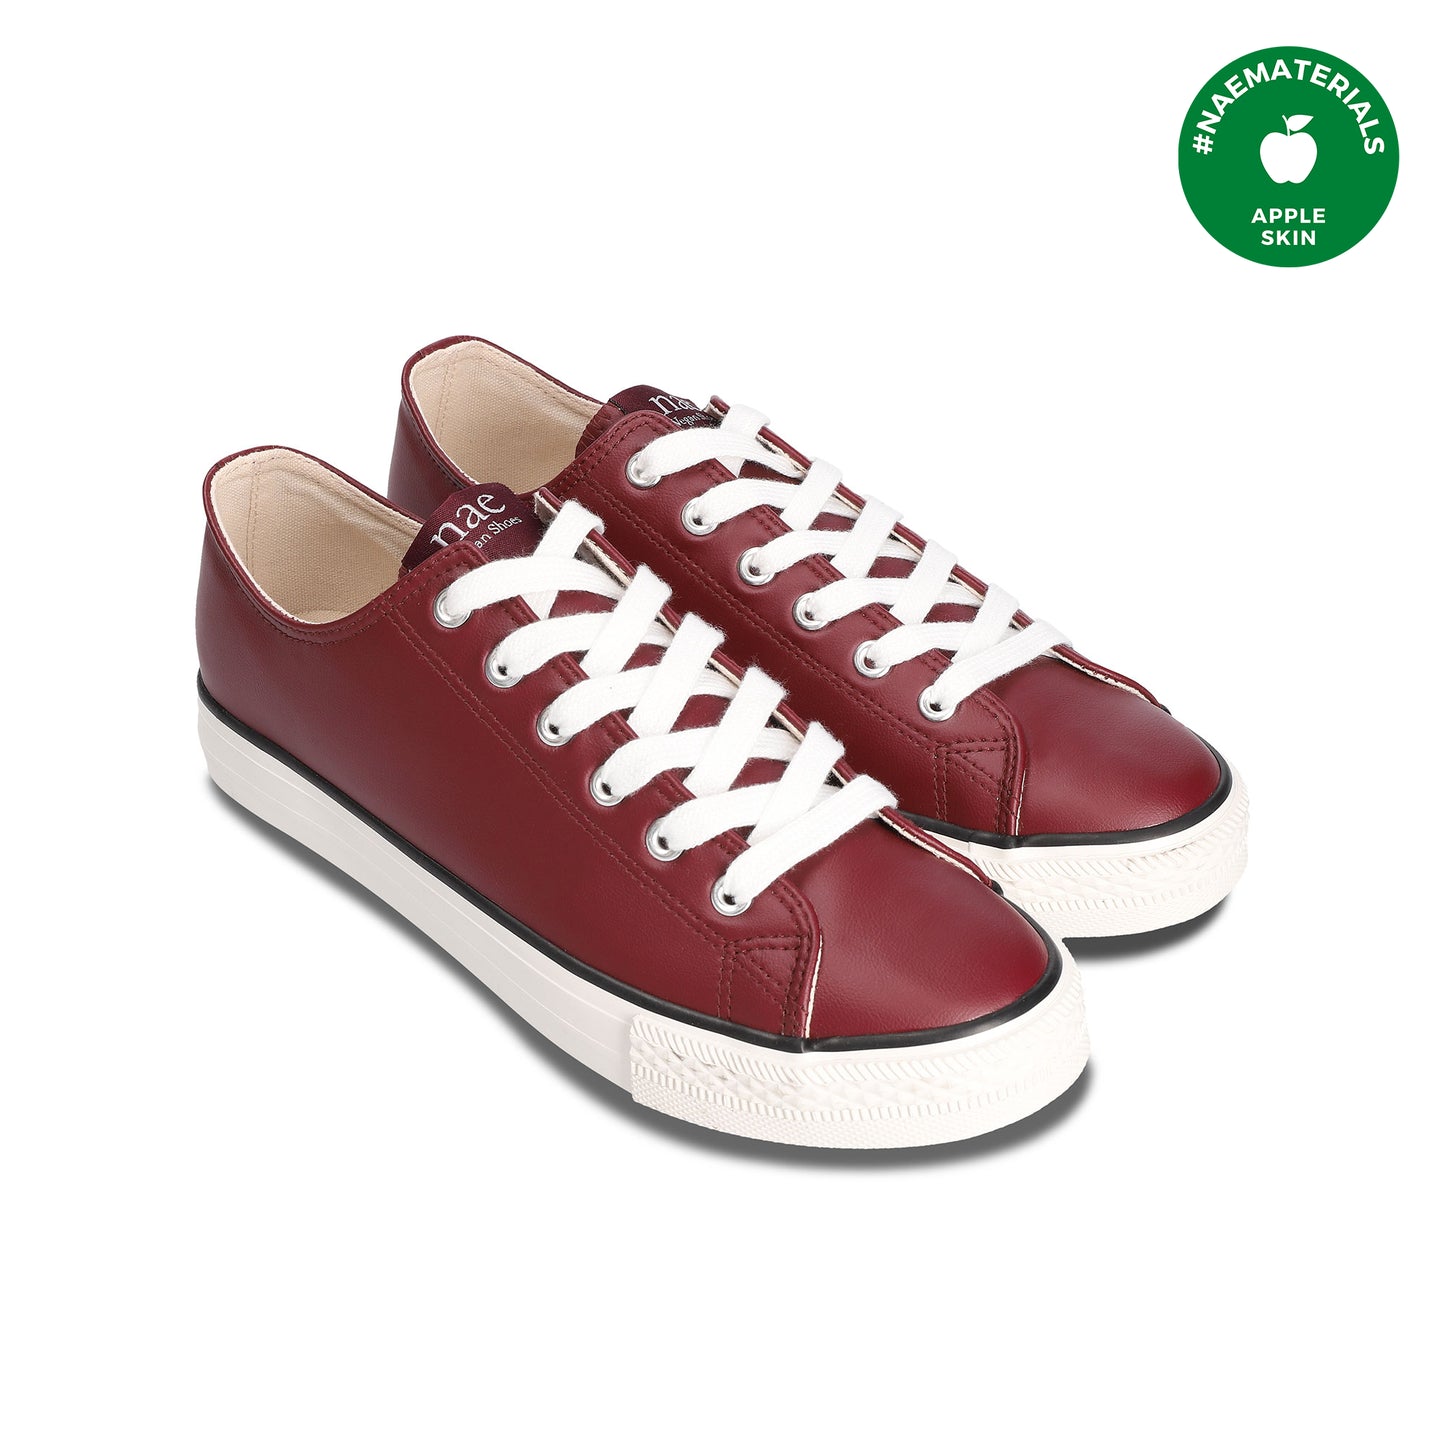 Clove Red Vegan Sneakers Low-Top Lace-Up